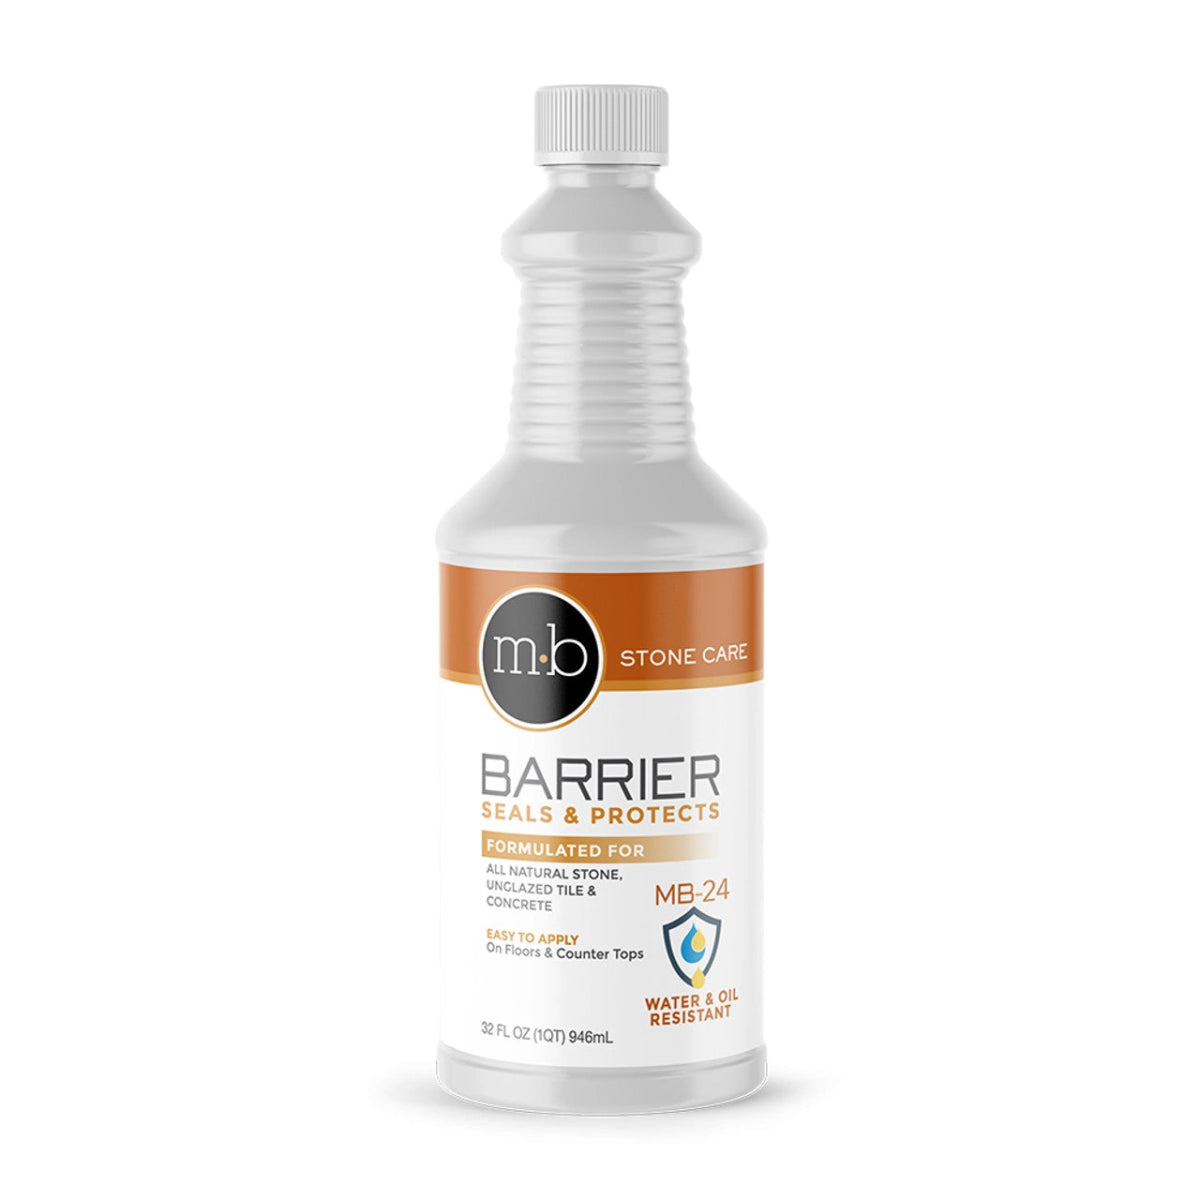 MB-24 Barrier - MB Stone Care